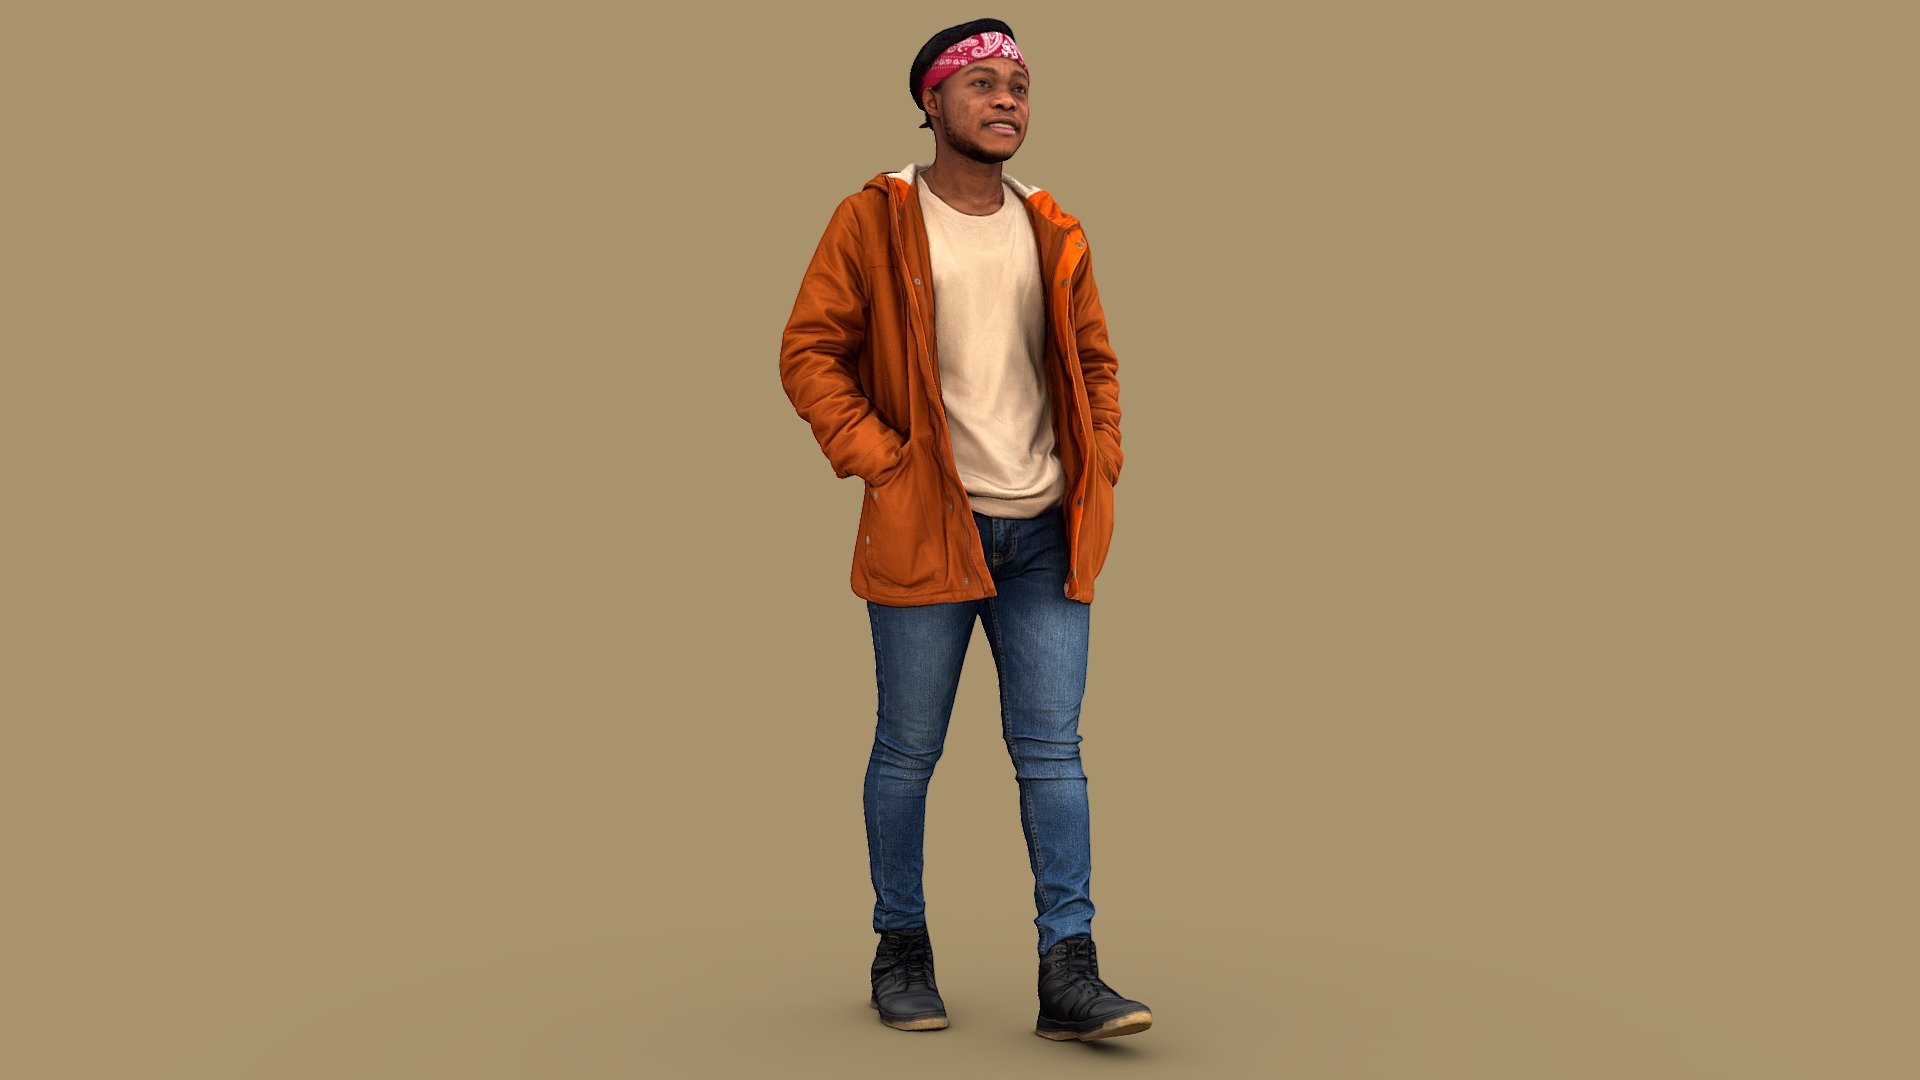 Follow us on Instagram✌🏼

✉️ A young guy with a smile on his face walks forward. He is wearing a warm orange jacket, blue skinny jeans, black sneakers and a bandana on his head.

🦾 This model will be an excellent mid-range participant. It does not need to be very close and try to see the details, it reveals and demonstrates its texture as much as possible in case of a certain distance from the foreground.

⚙️ Photorealistic Casual Character 3d model ready for Virtual Reality (VR), Augmented Reality (AR), games and other real-time apps. Suitable for the architectural visualization and another graphical projects. 50 000 polygons per model.

QAJL38 - Forward with Smile - 3D model by kanistra 3d model